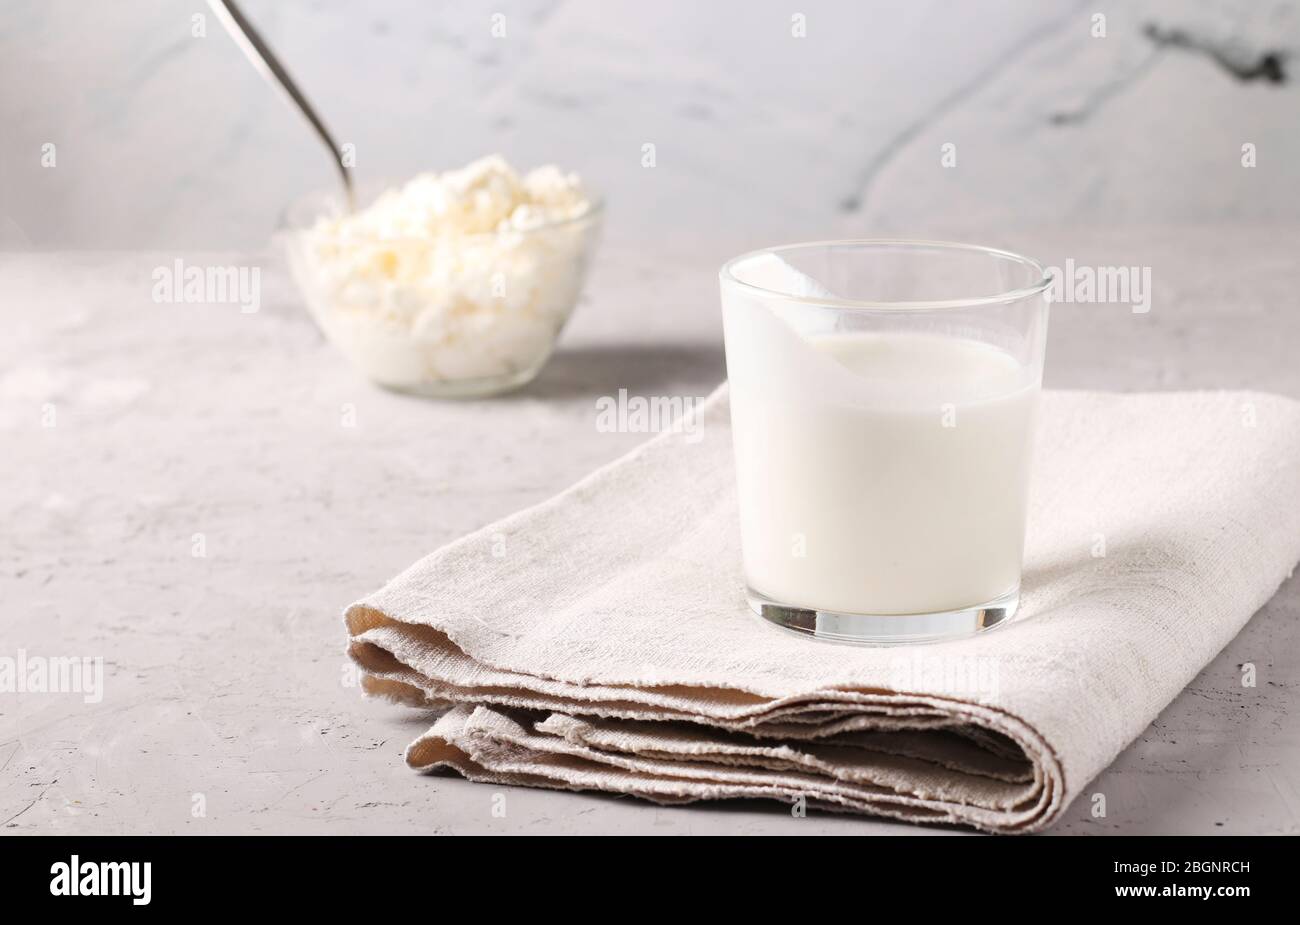 Kefir or Ayran fermented drink in glass and cottage cheese in a bowl on a light gray background, Copy space, Close up Stock Photo